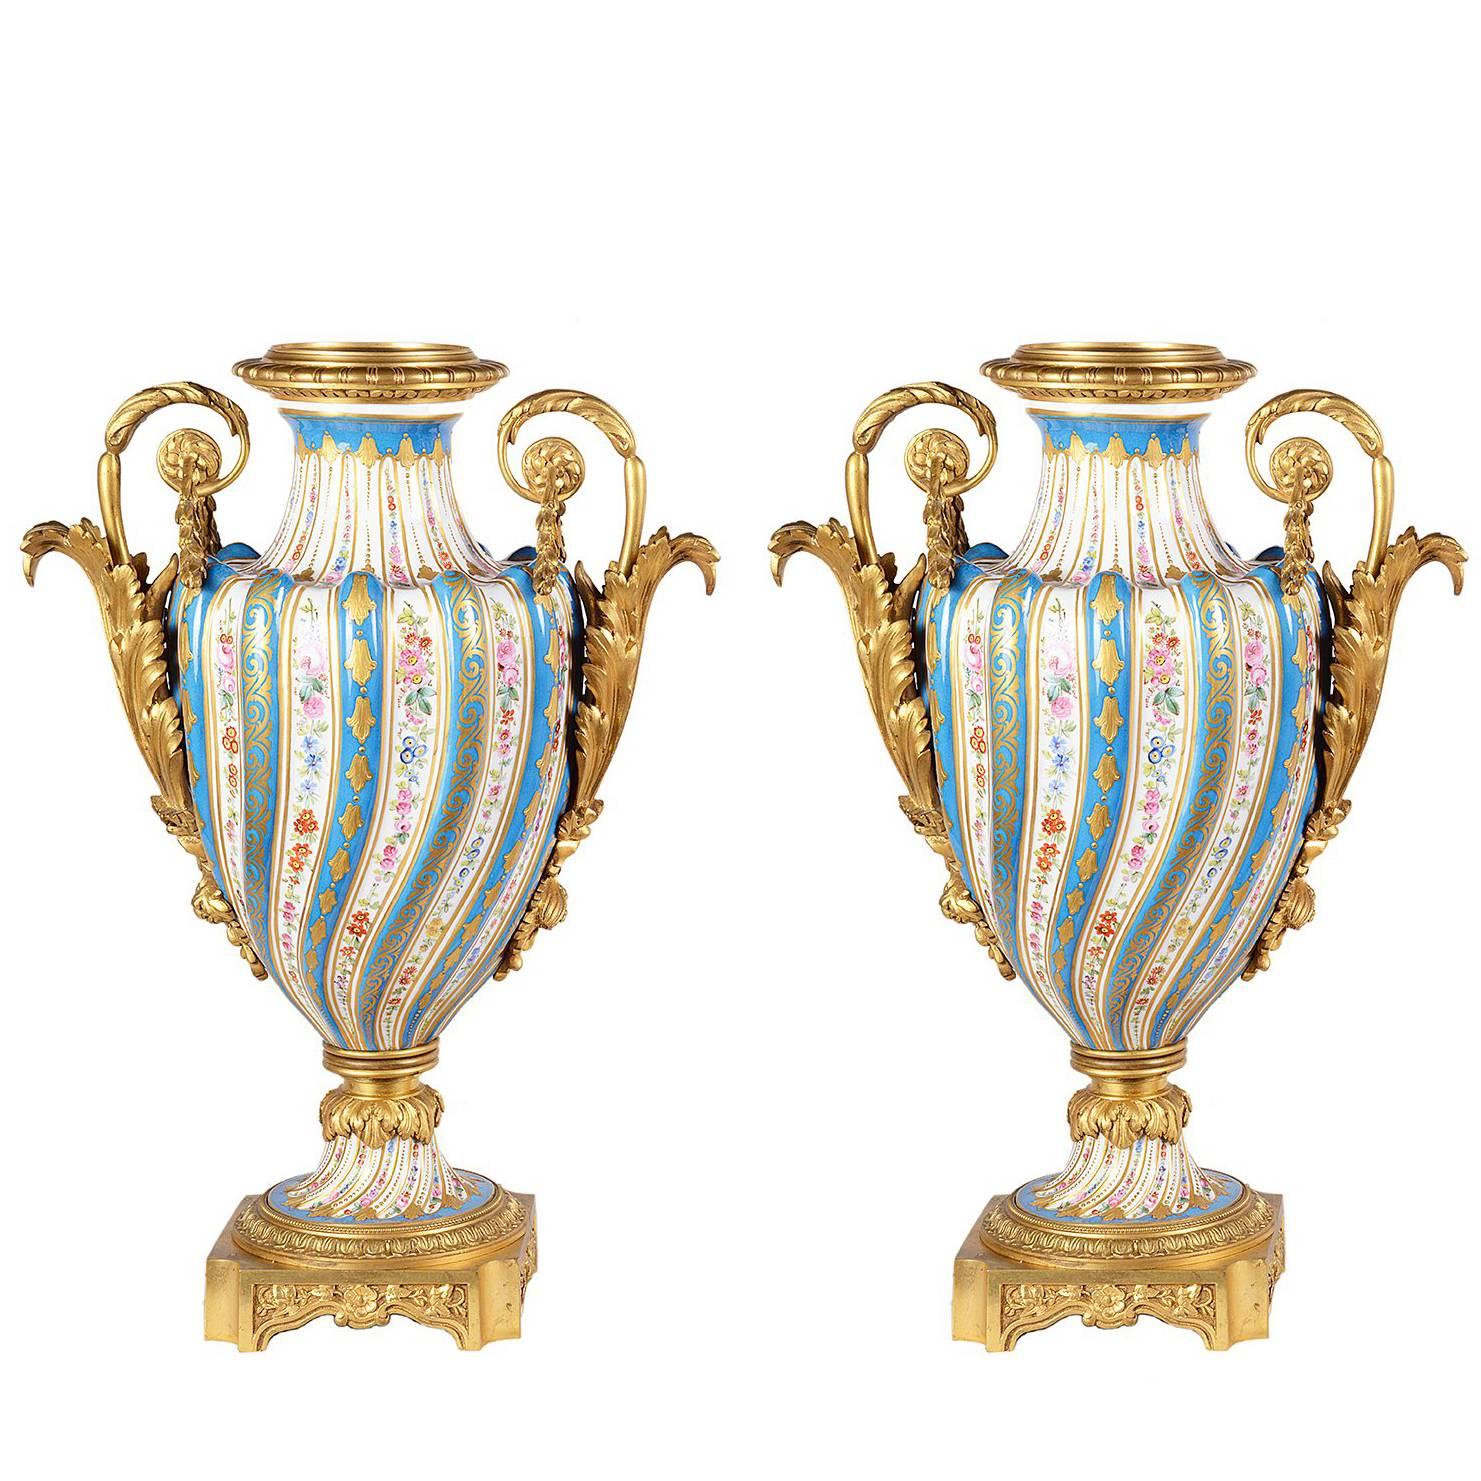 Fine Quality Pair of French Sevres Style Porcelain Vases